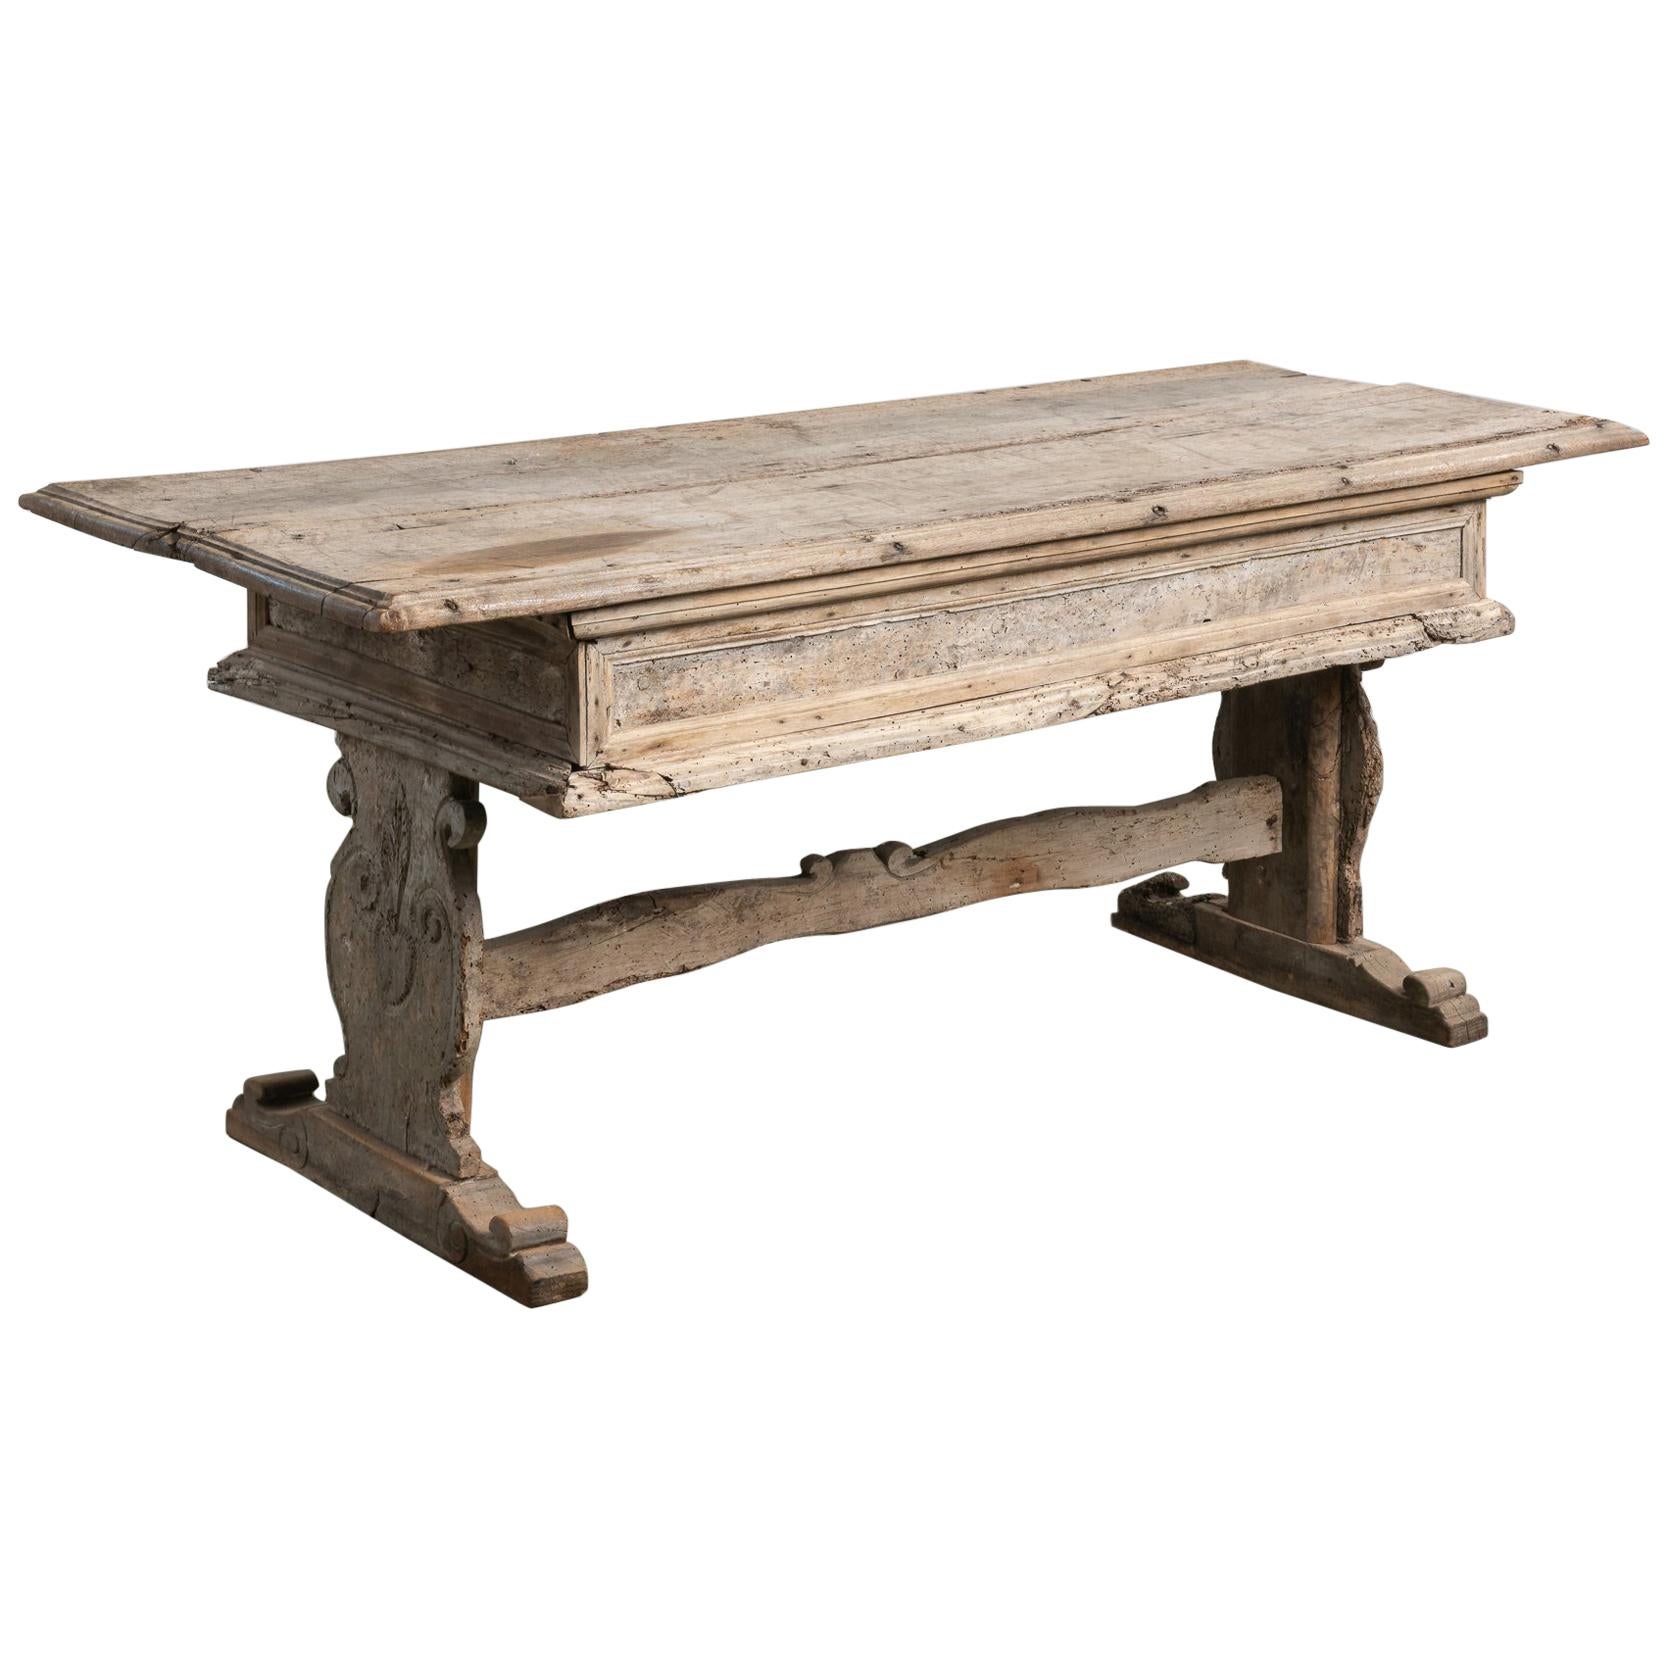 Primitive Refectory Table, Italy, 17th Century